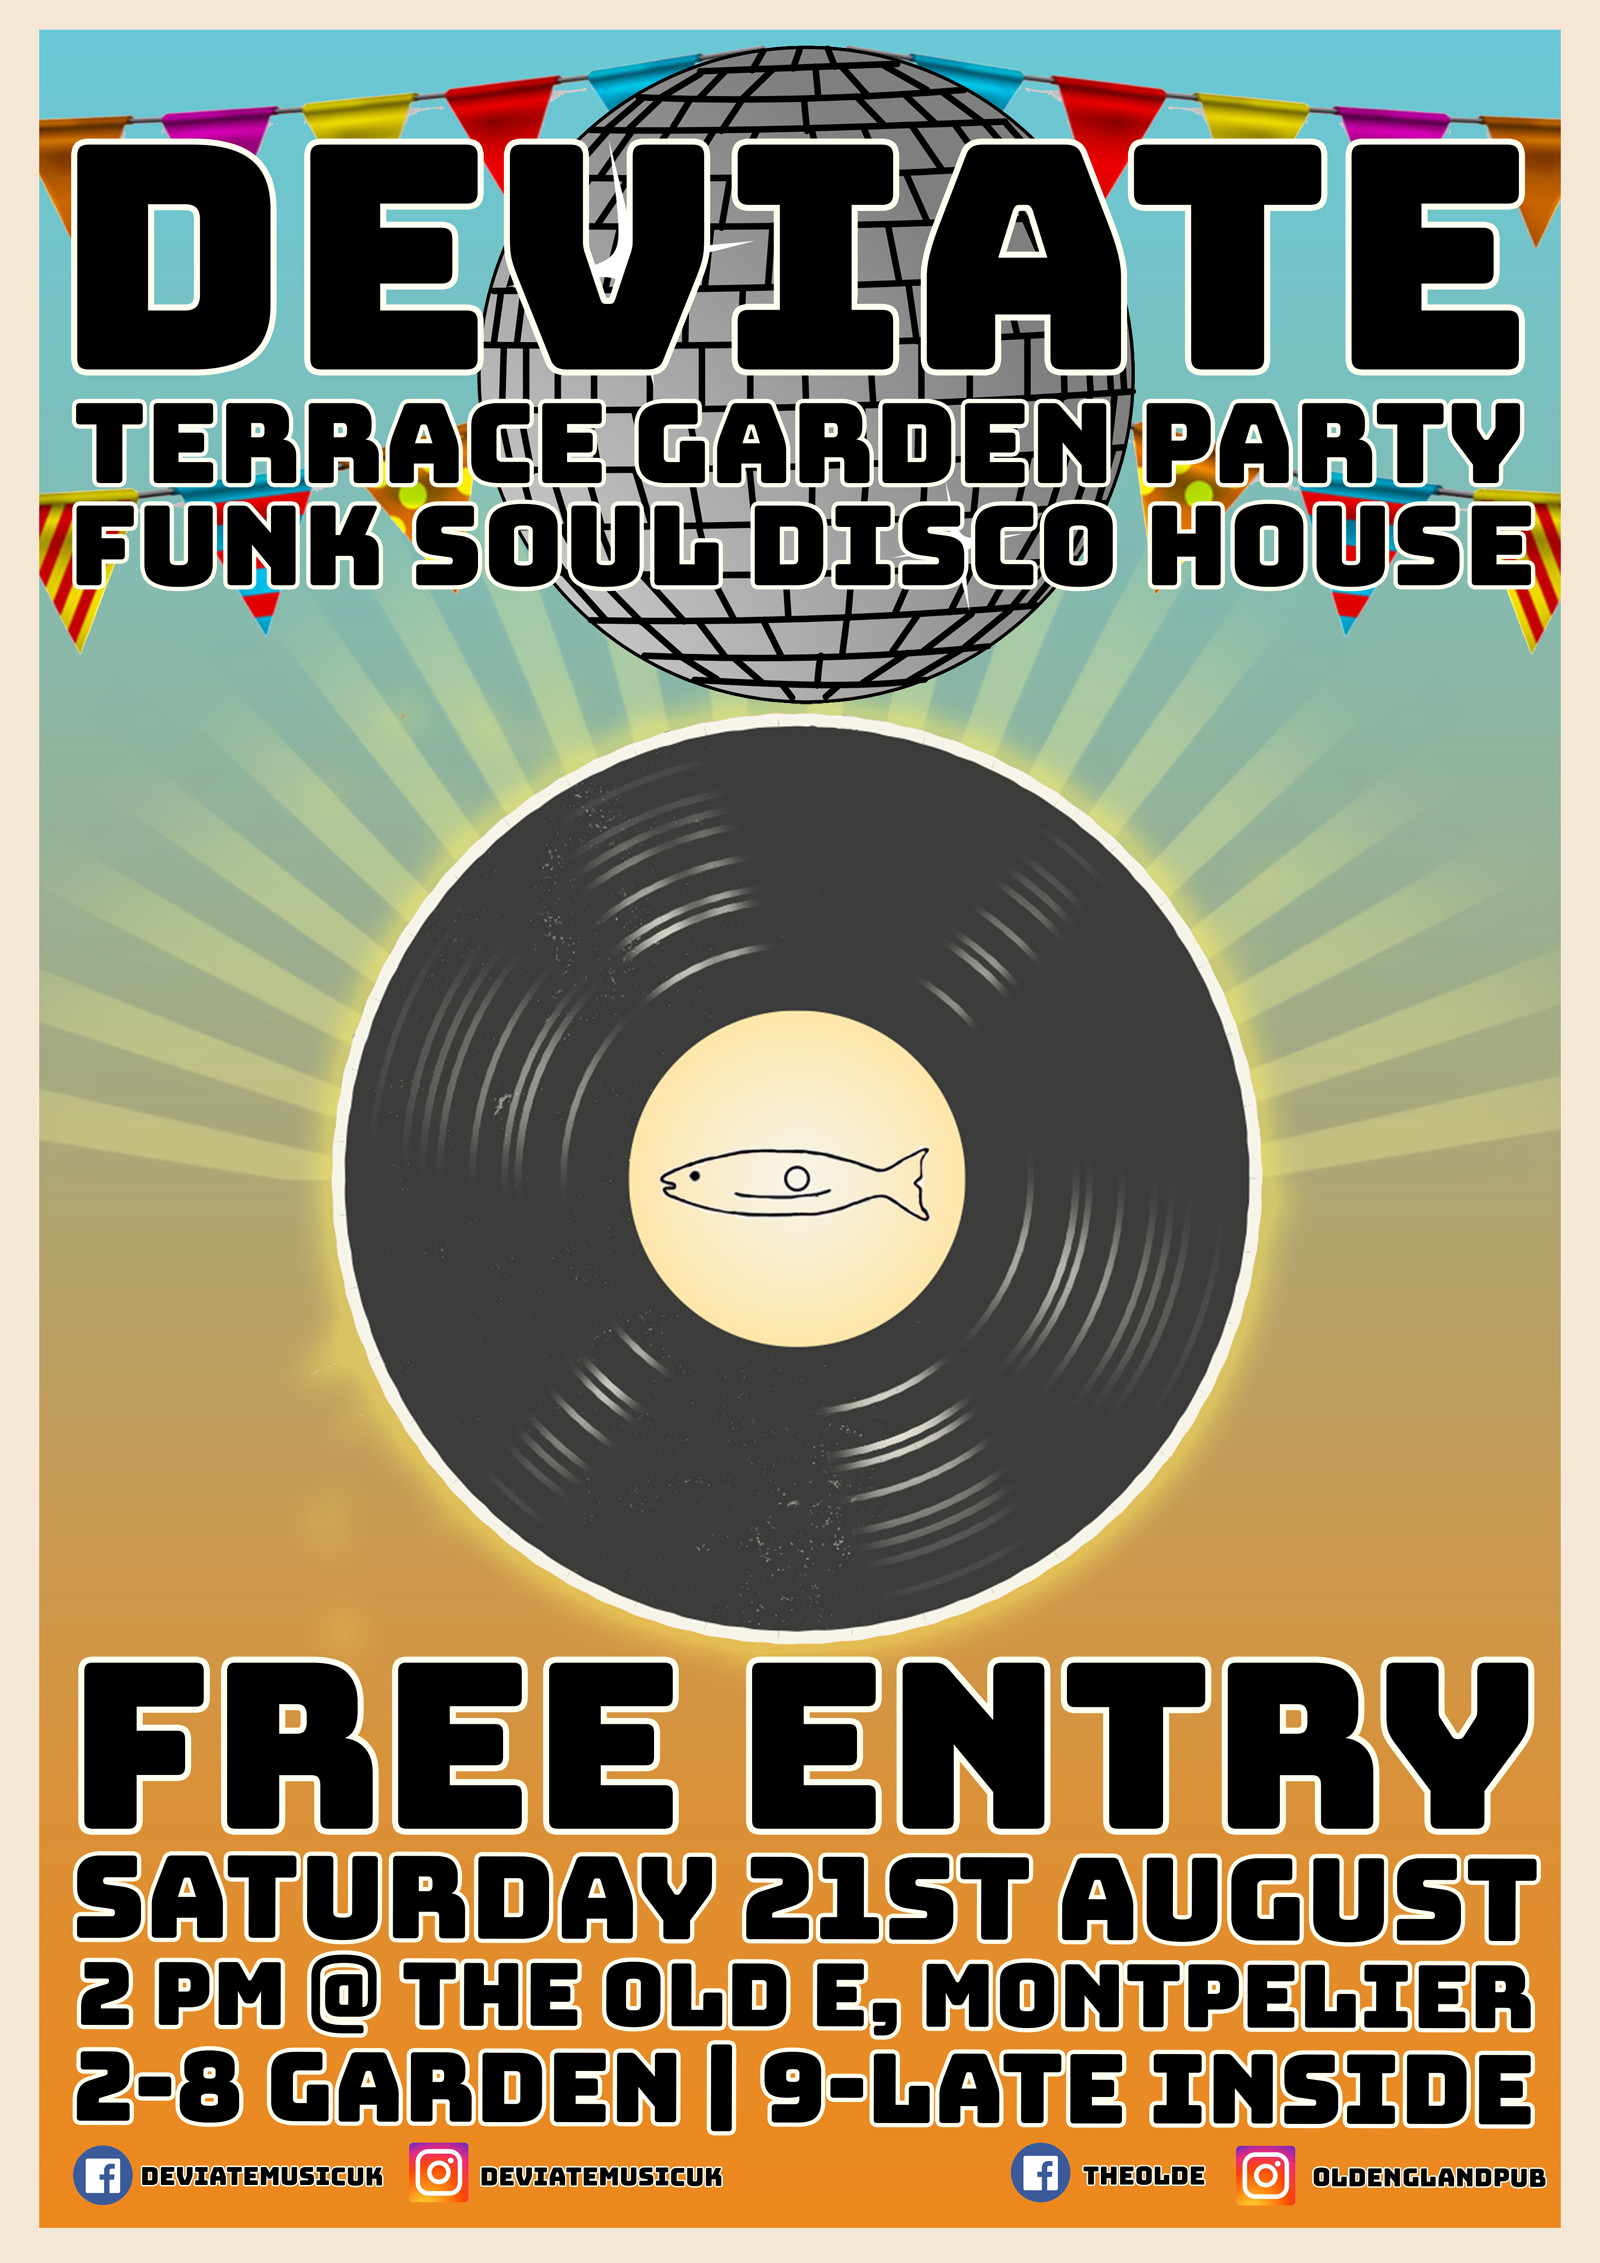 Deviate Terrace Garden Party at The Old England Pub